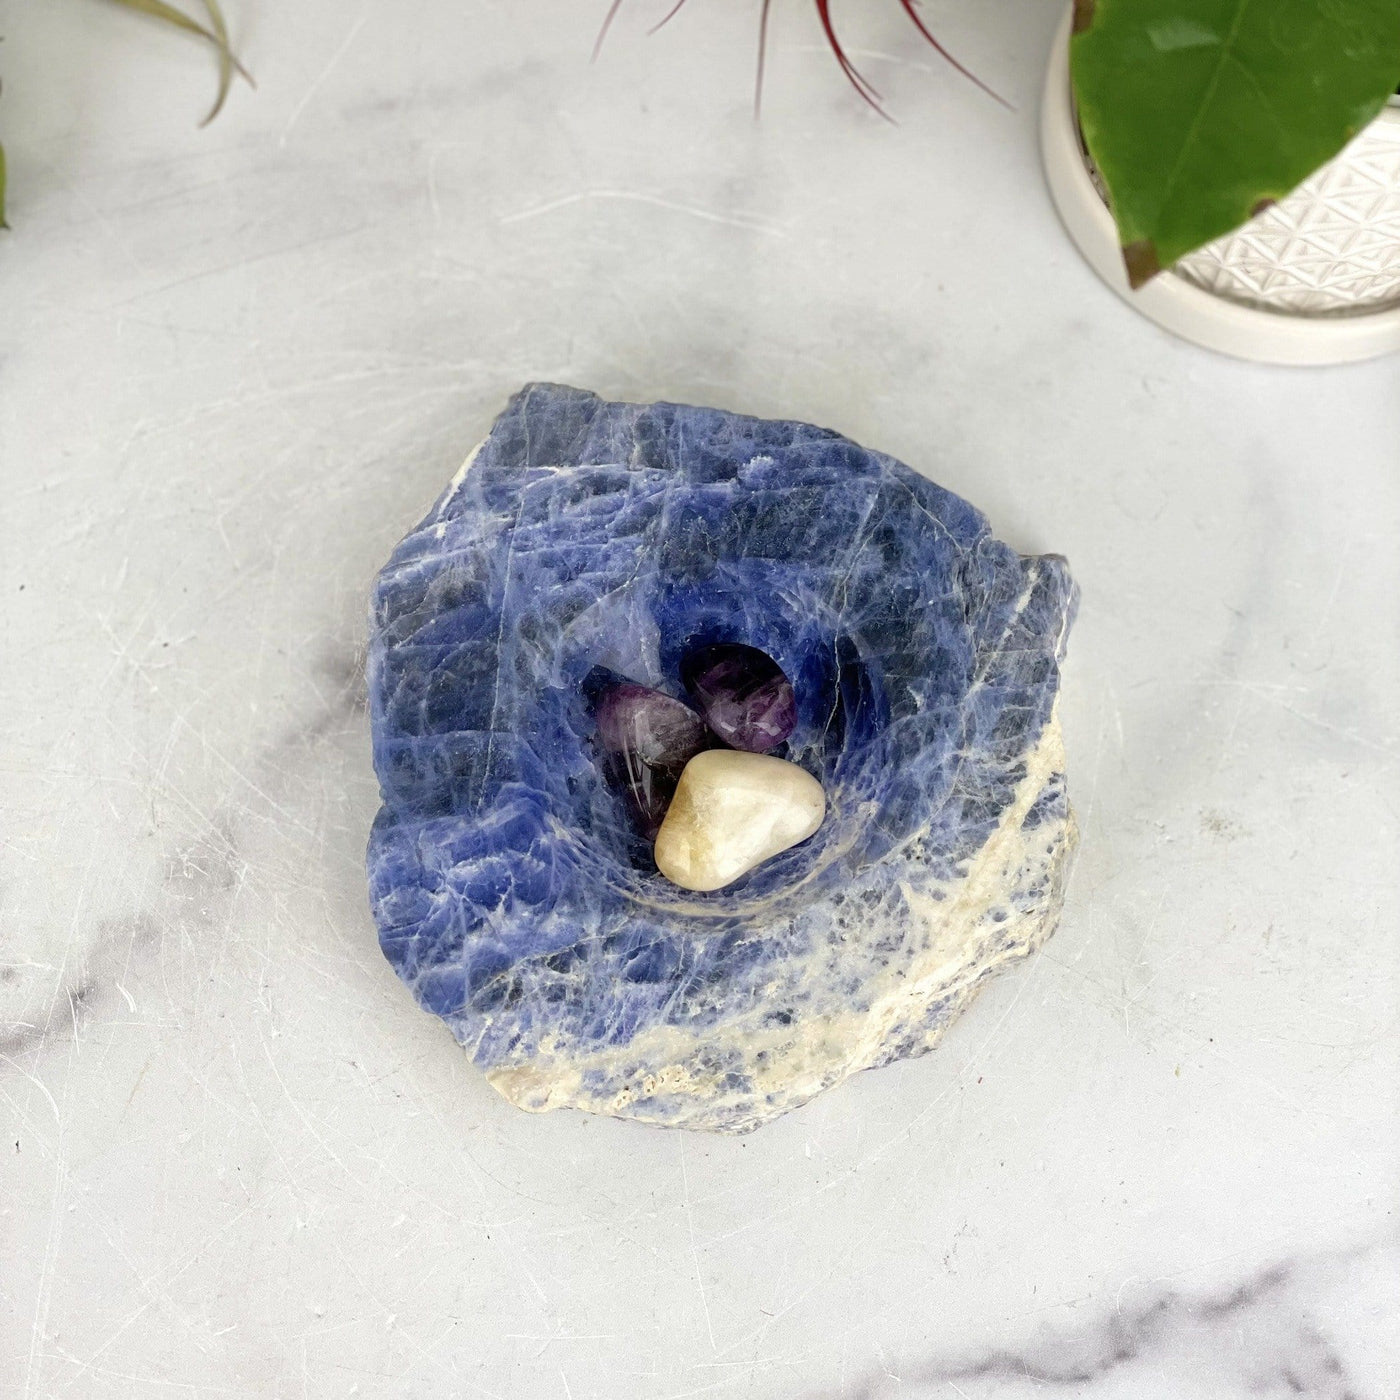 overhead view of sodalite polished soap dish with three stones inside for size reference